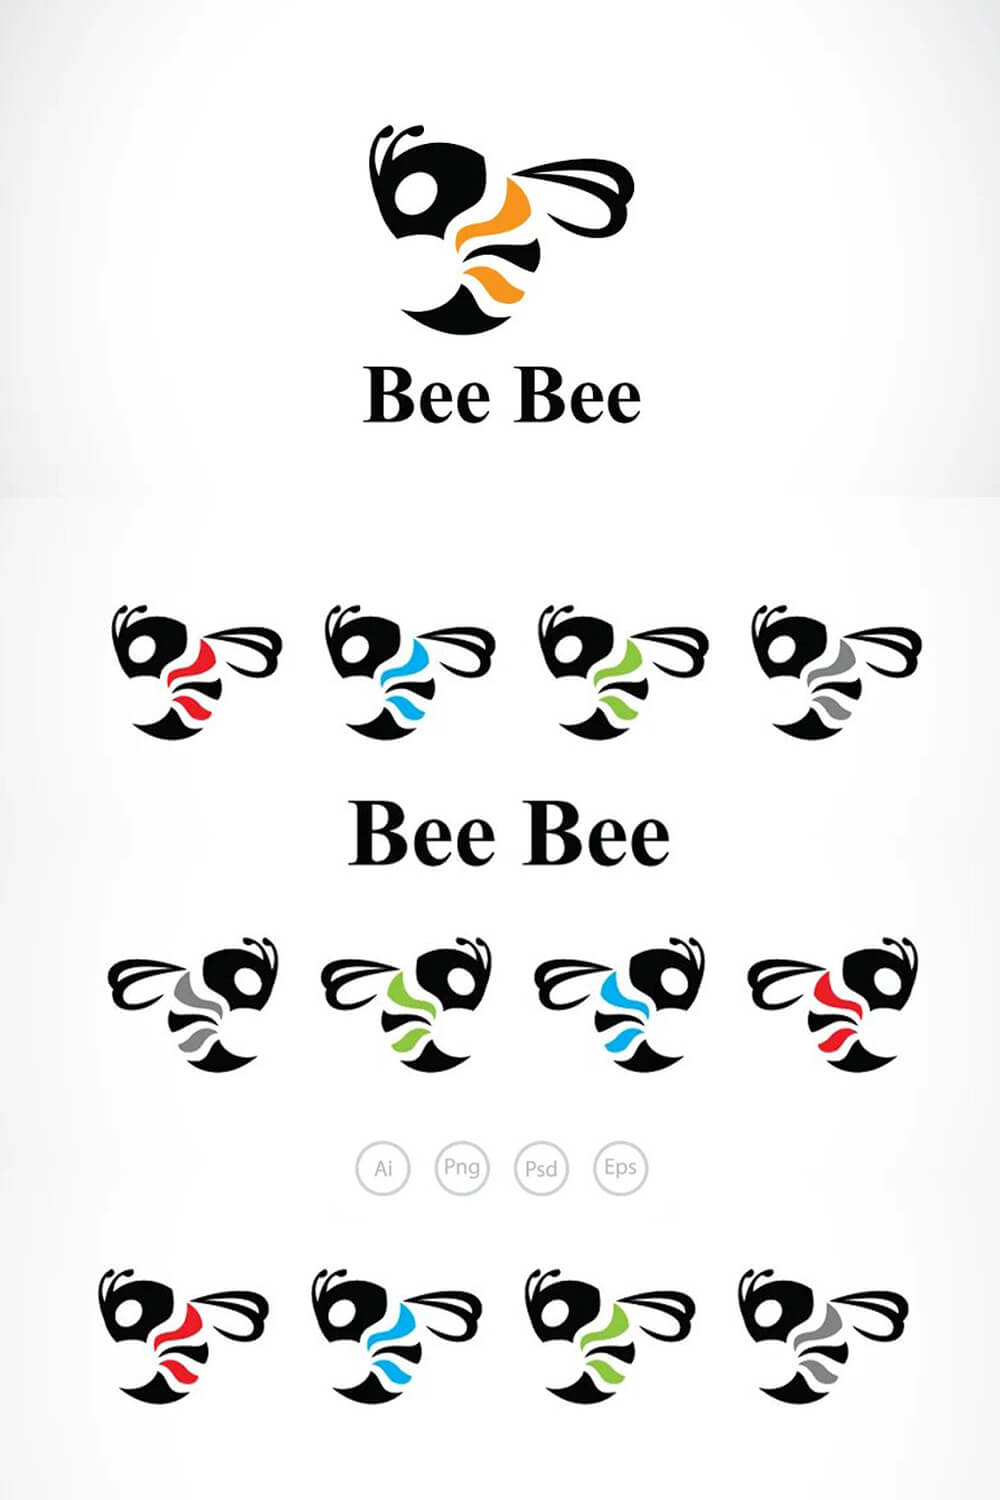 Variants of bee logos in different colors.